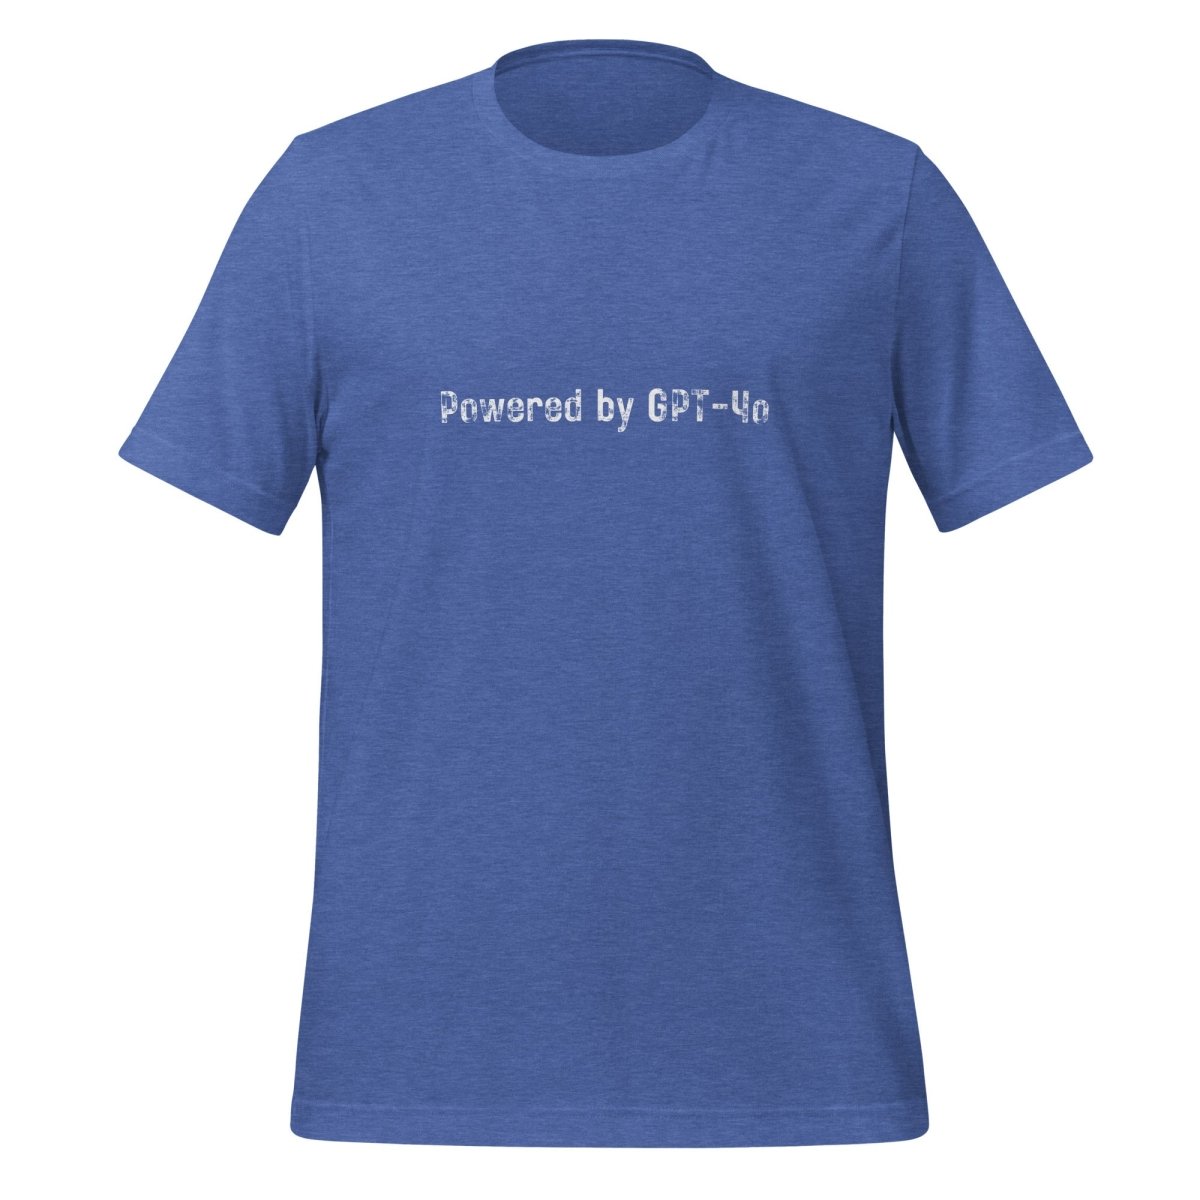 Powered by GPT - 4o T - Shirt 2 (unisex) - Heather True Royal - AI Store